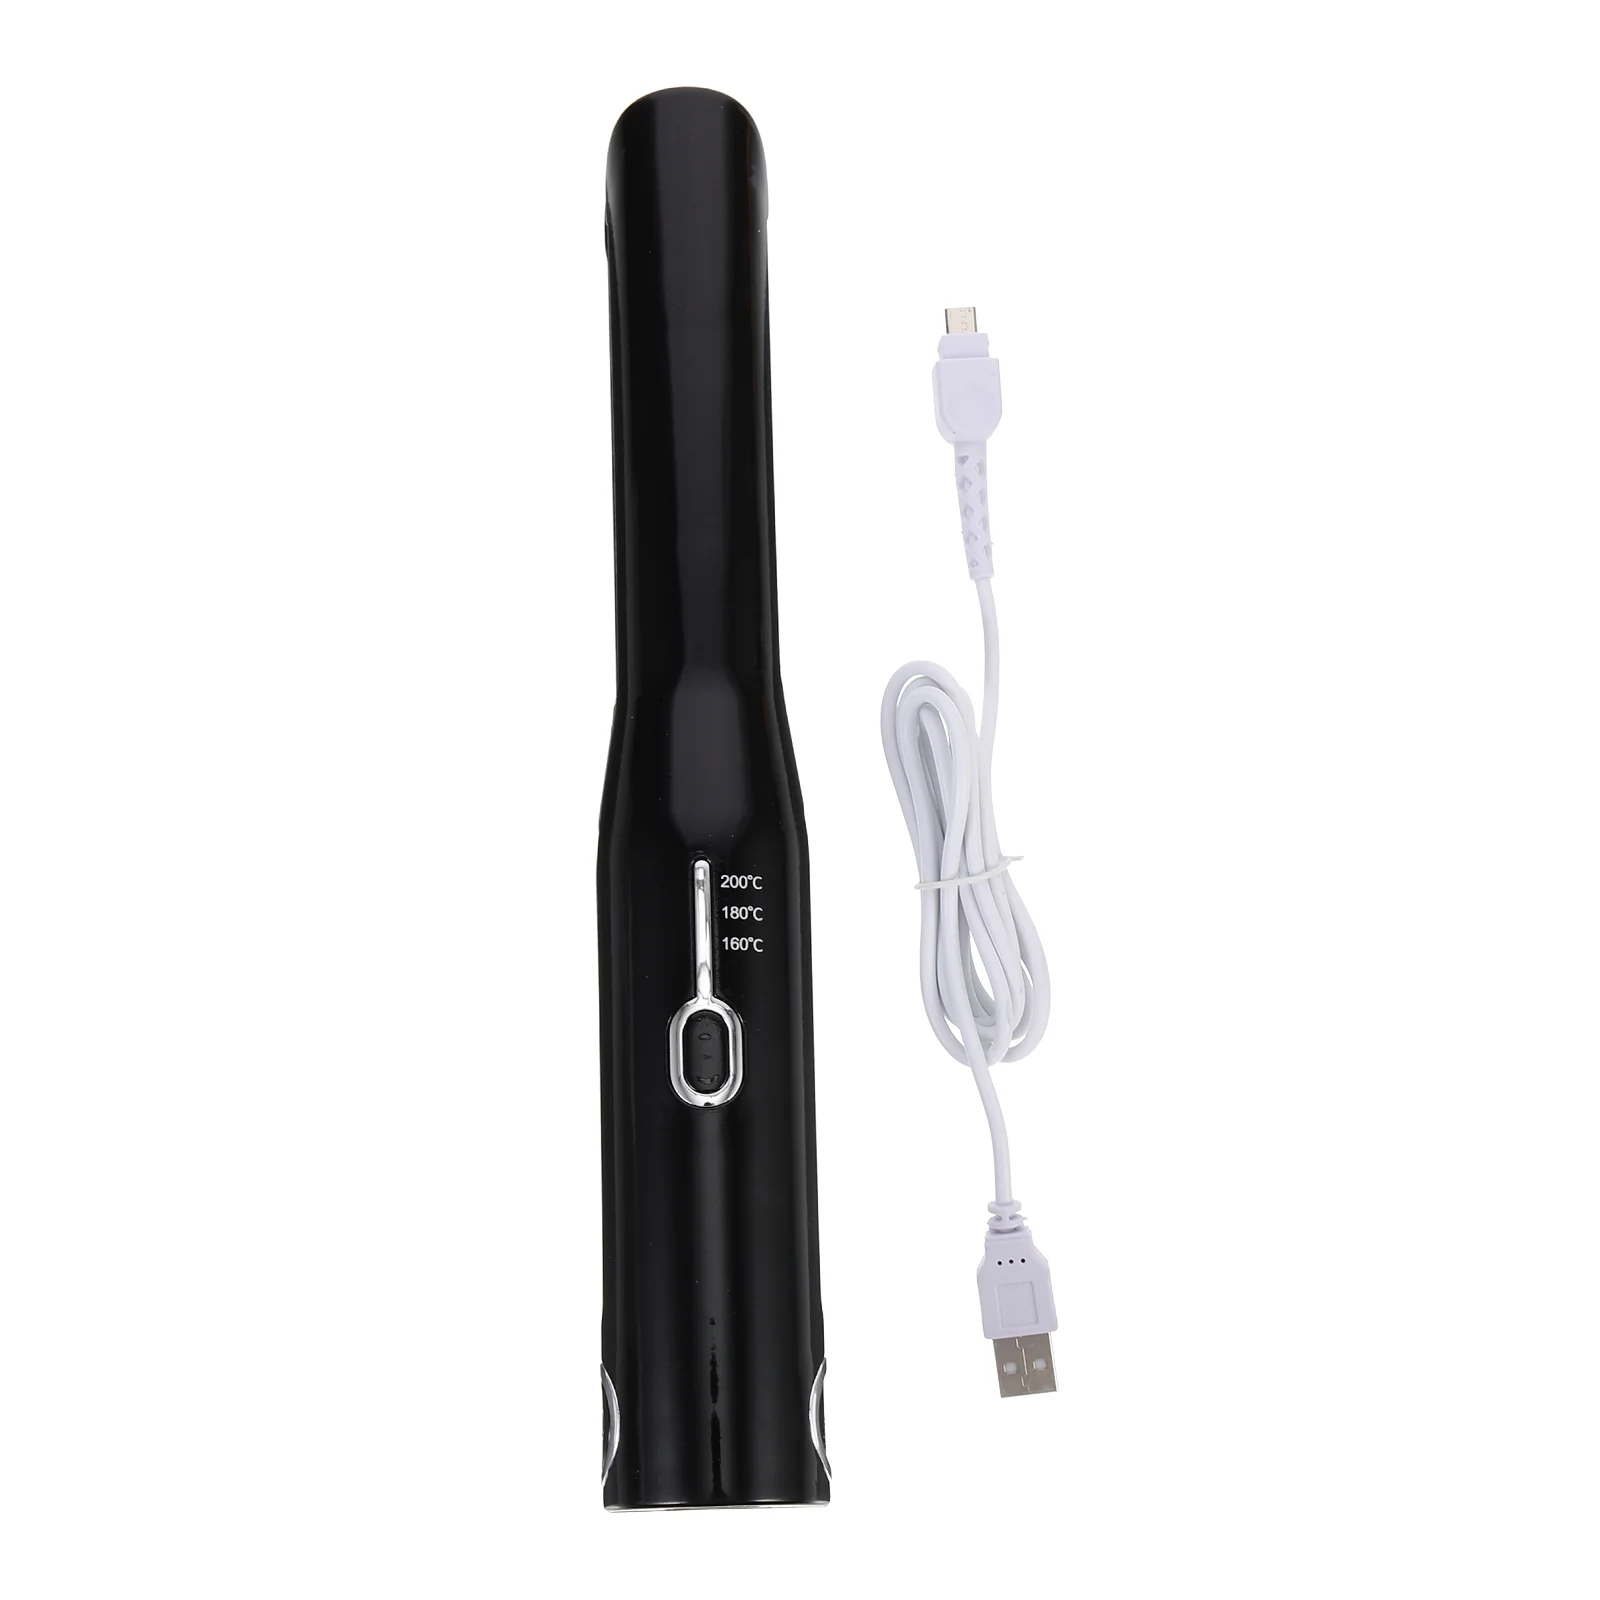 Hair Straightener Curling Iron Straightening Tool Adjustable Temperature Hairstyling Wand Abs for Travel Crimper Women